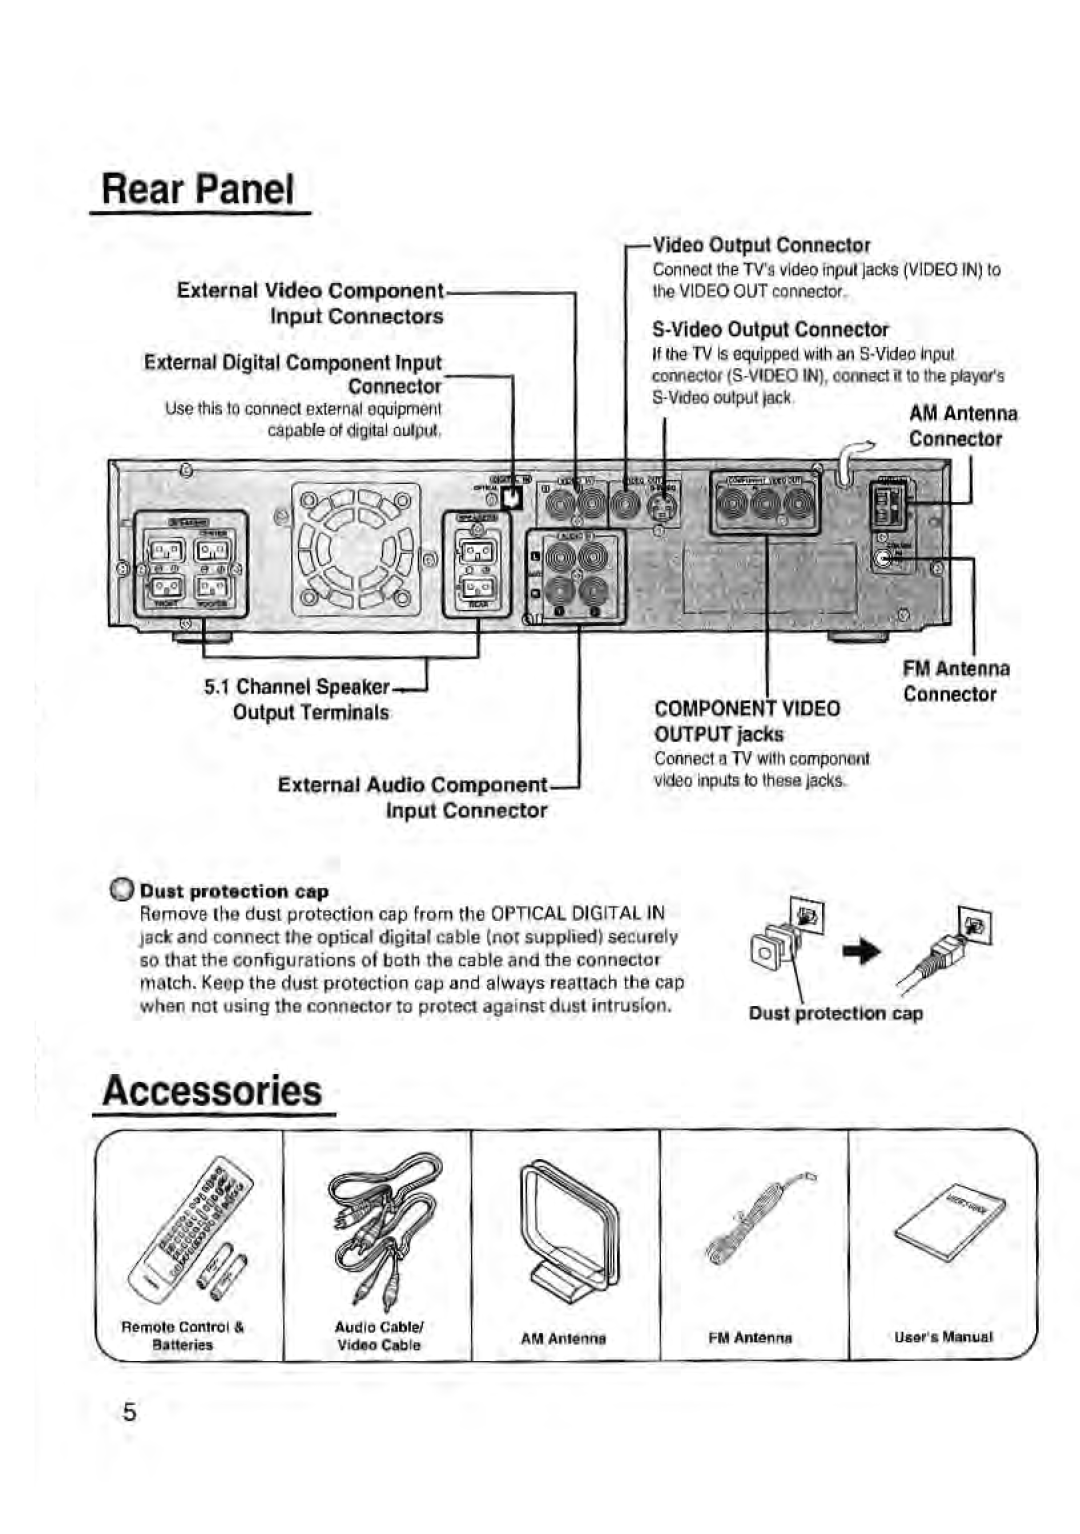 Toshiba SD-43HK Accessories, Rear Panel, External Video Component, Video Output Connector, S-VideoOutput Connector 